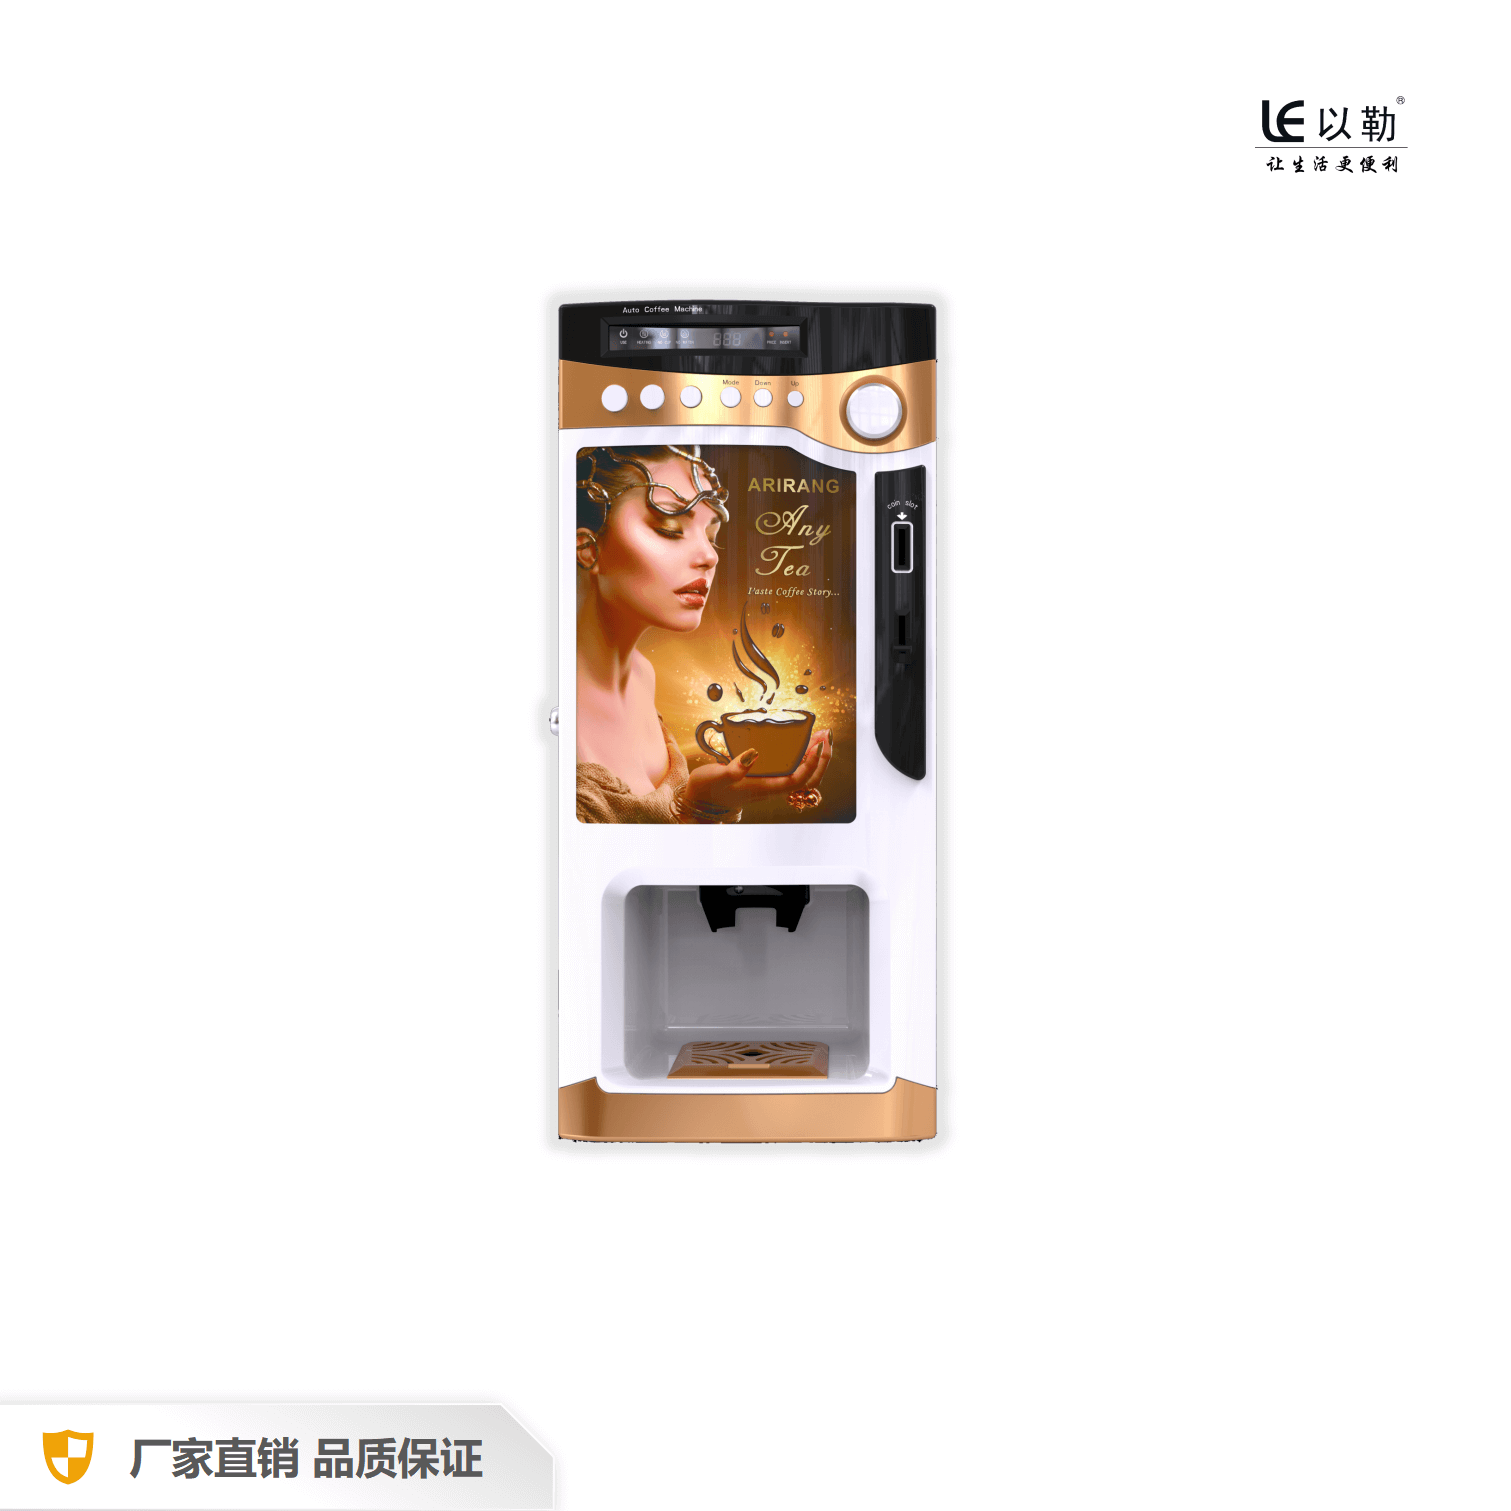 Small Coin Operated Coffee Vending Machine With Cup Dispenser 